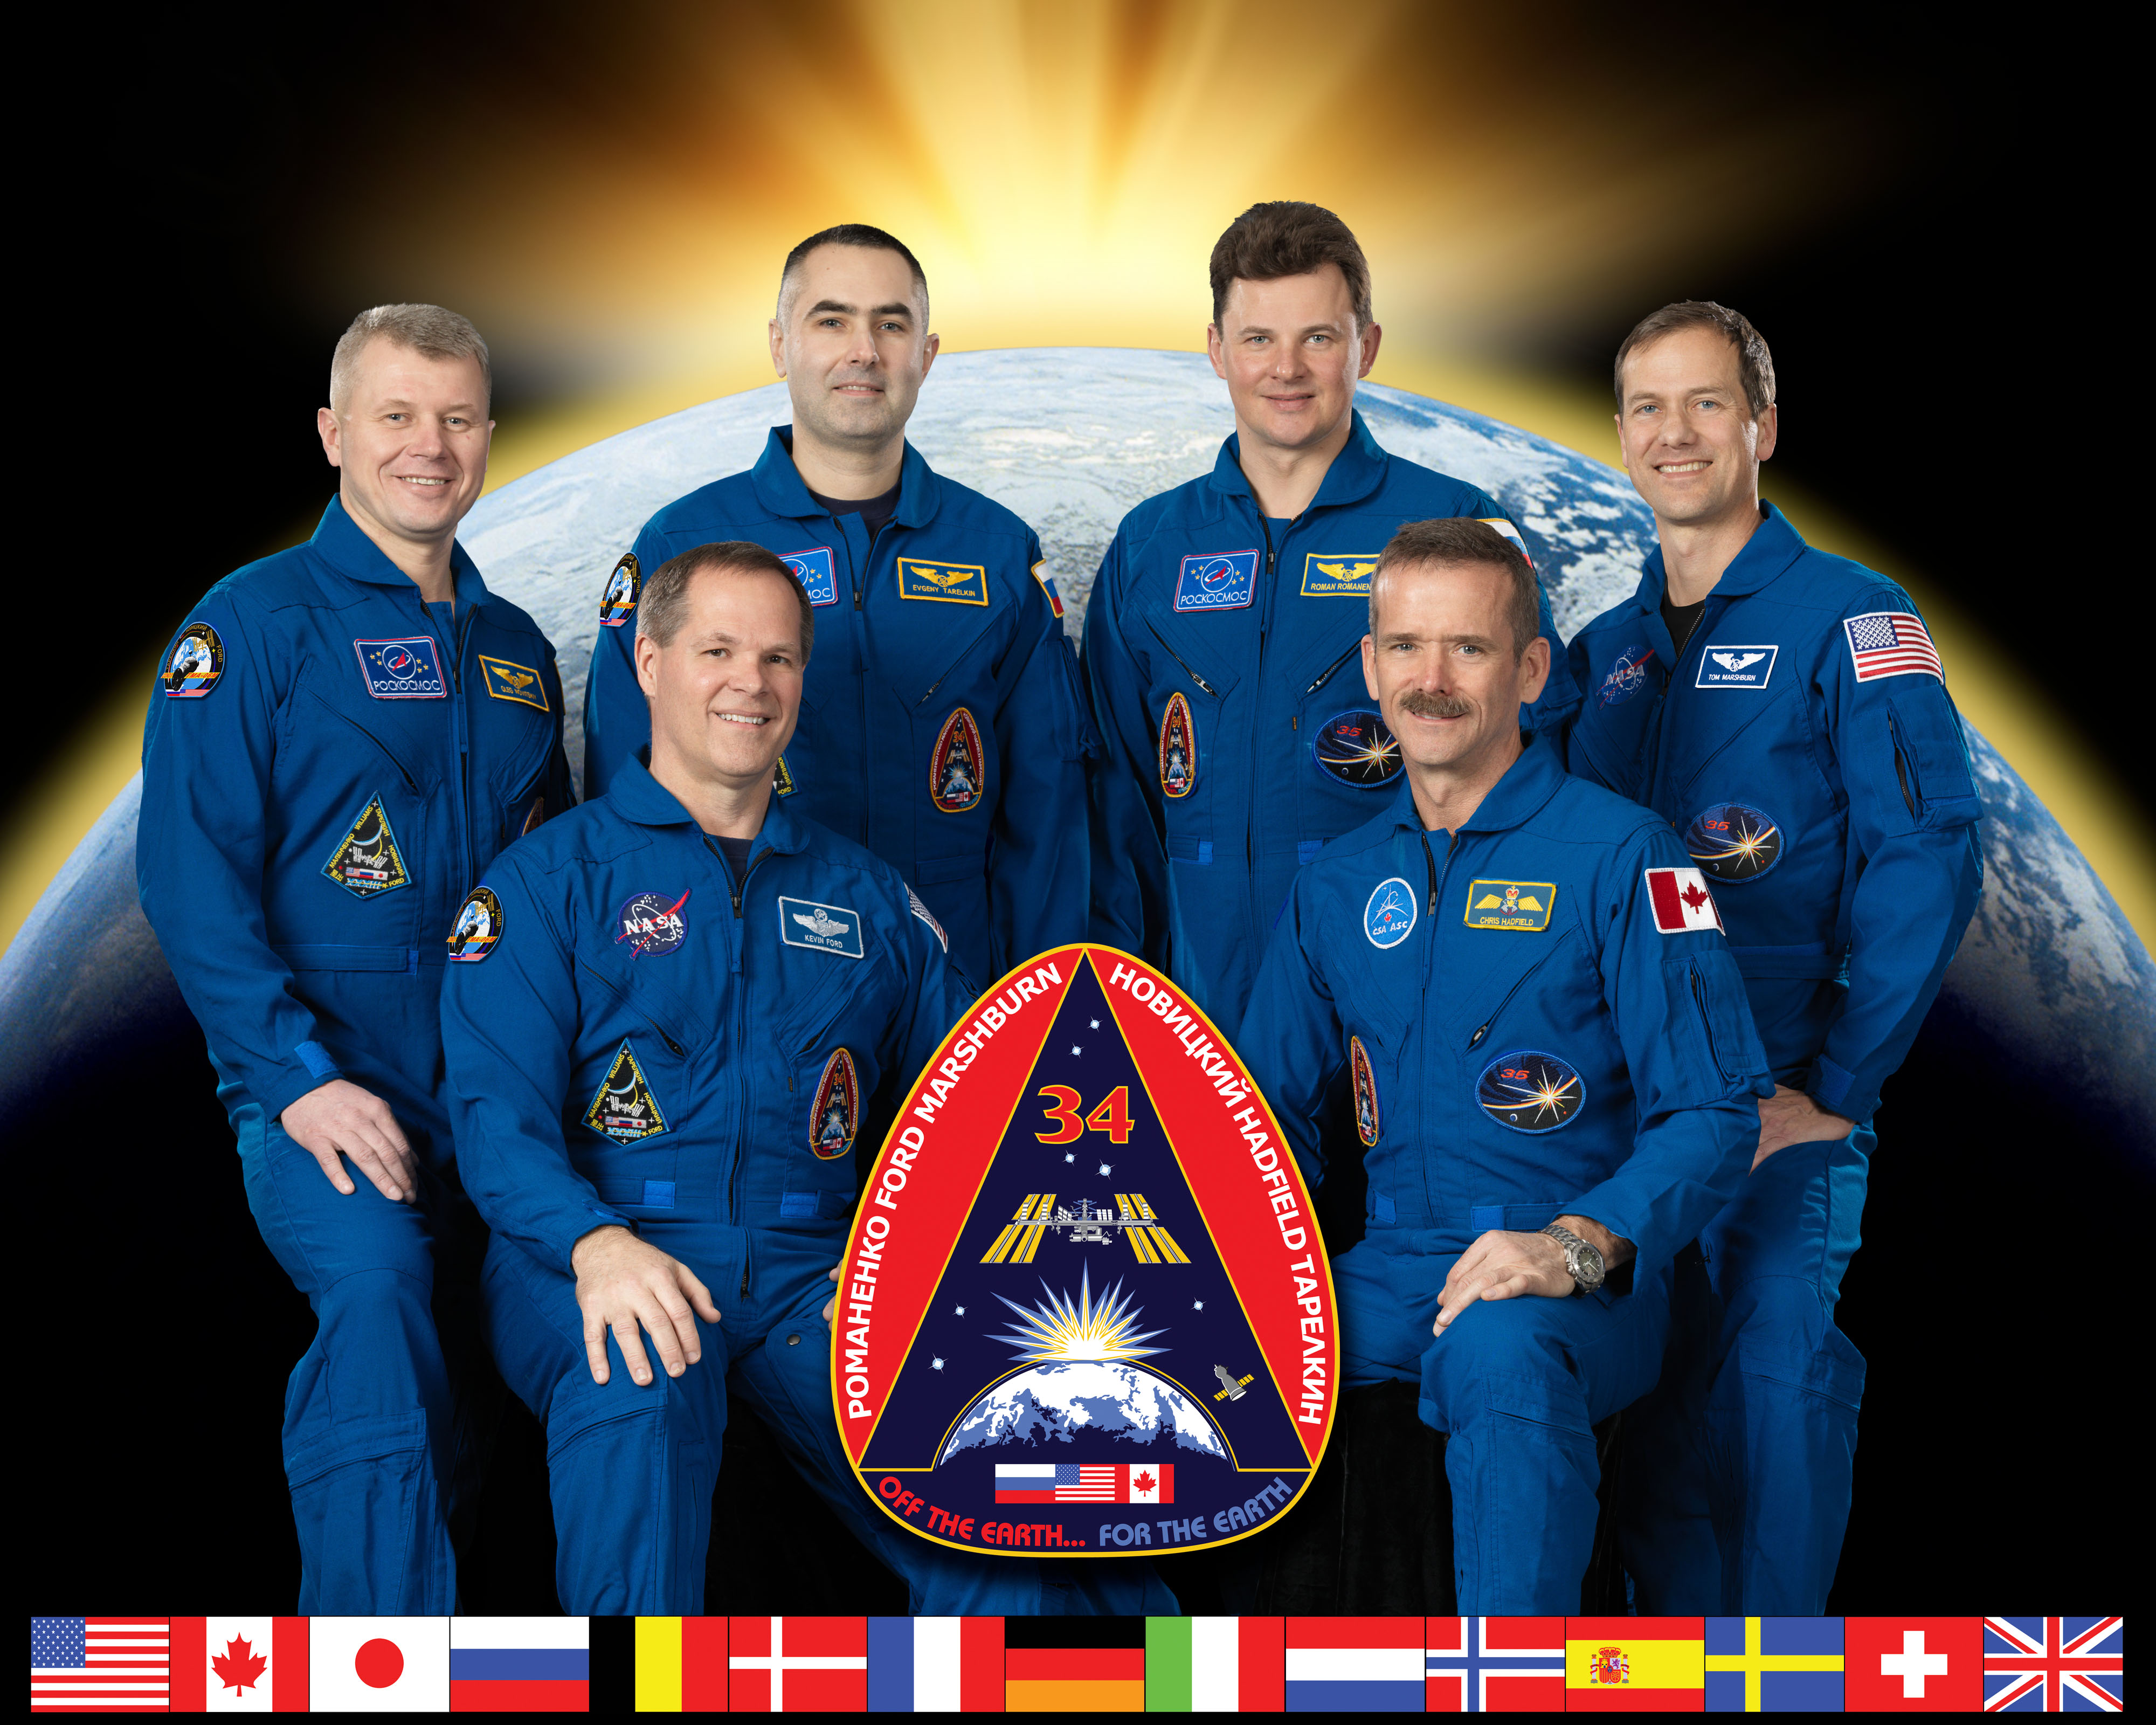 Expedition 34 Official Crew Portrait